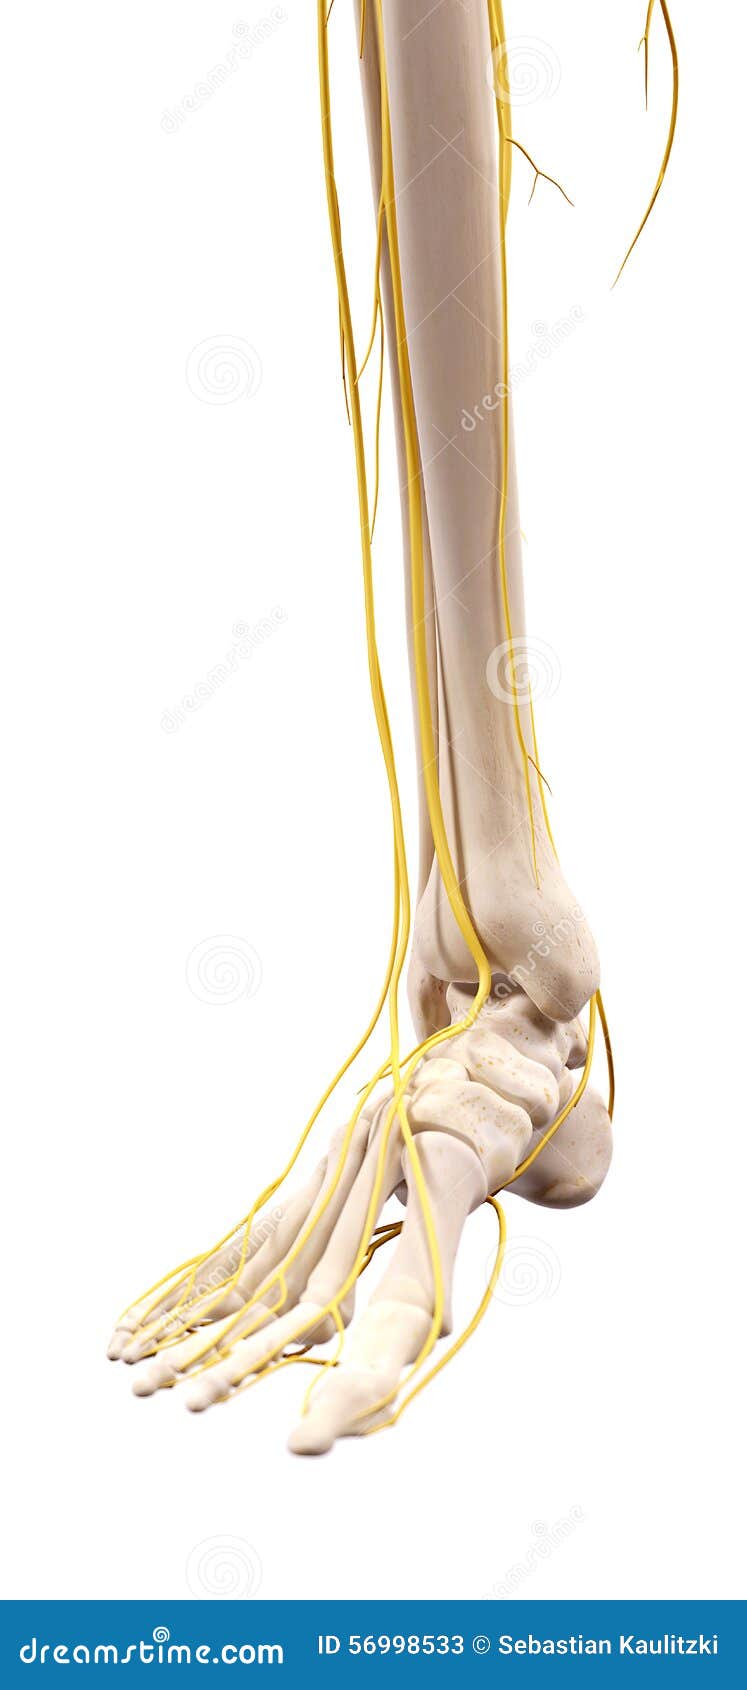 The Nerves Of The Foot Stock Illustration - Image: 56998533